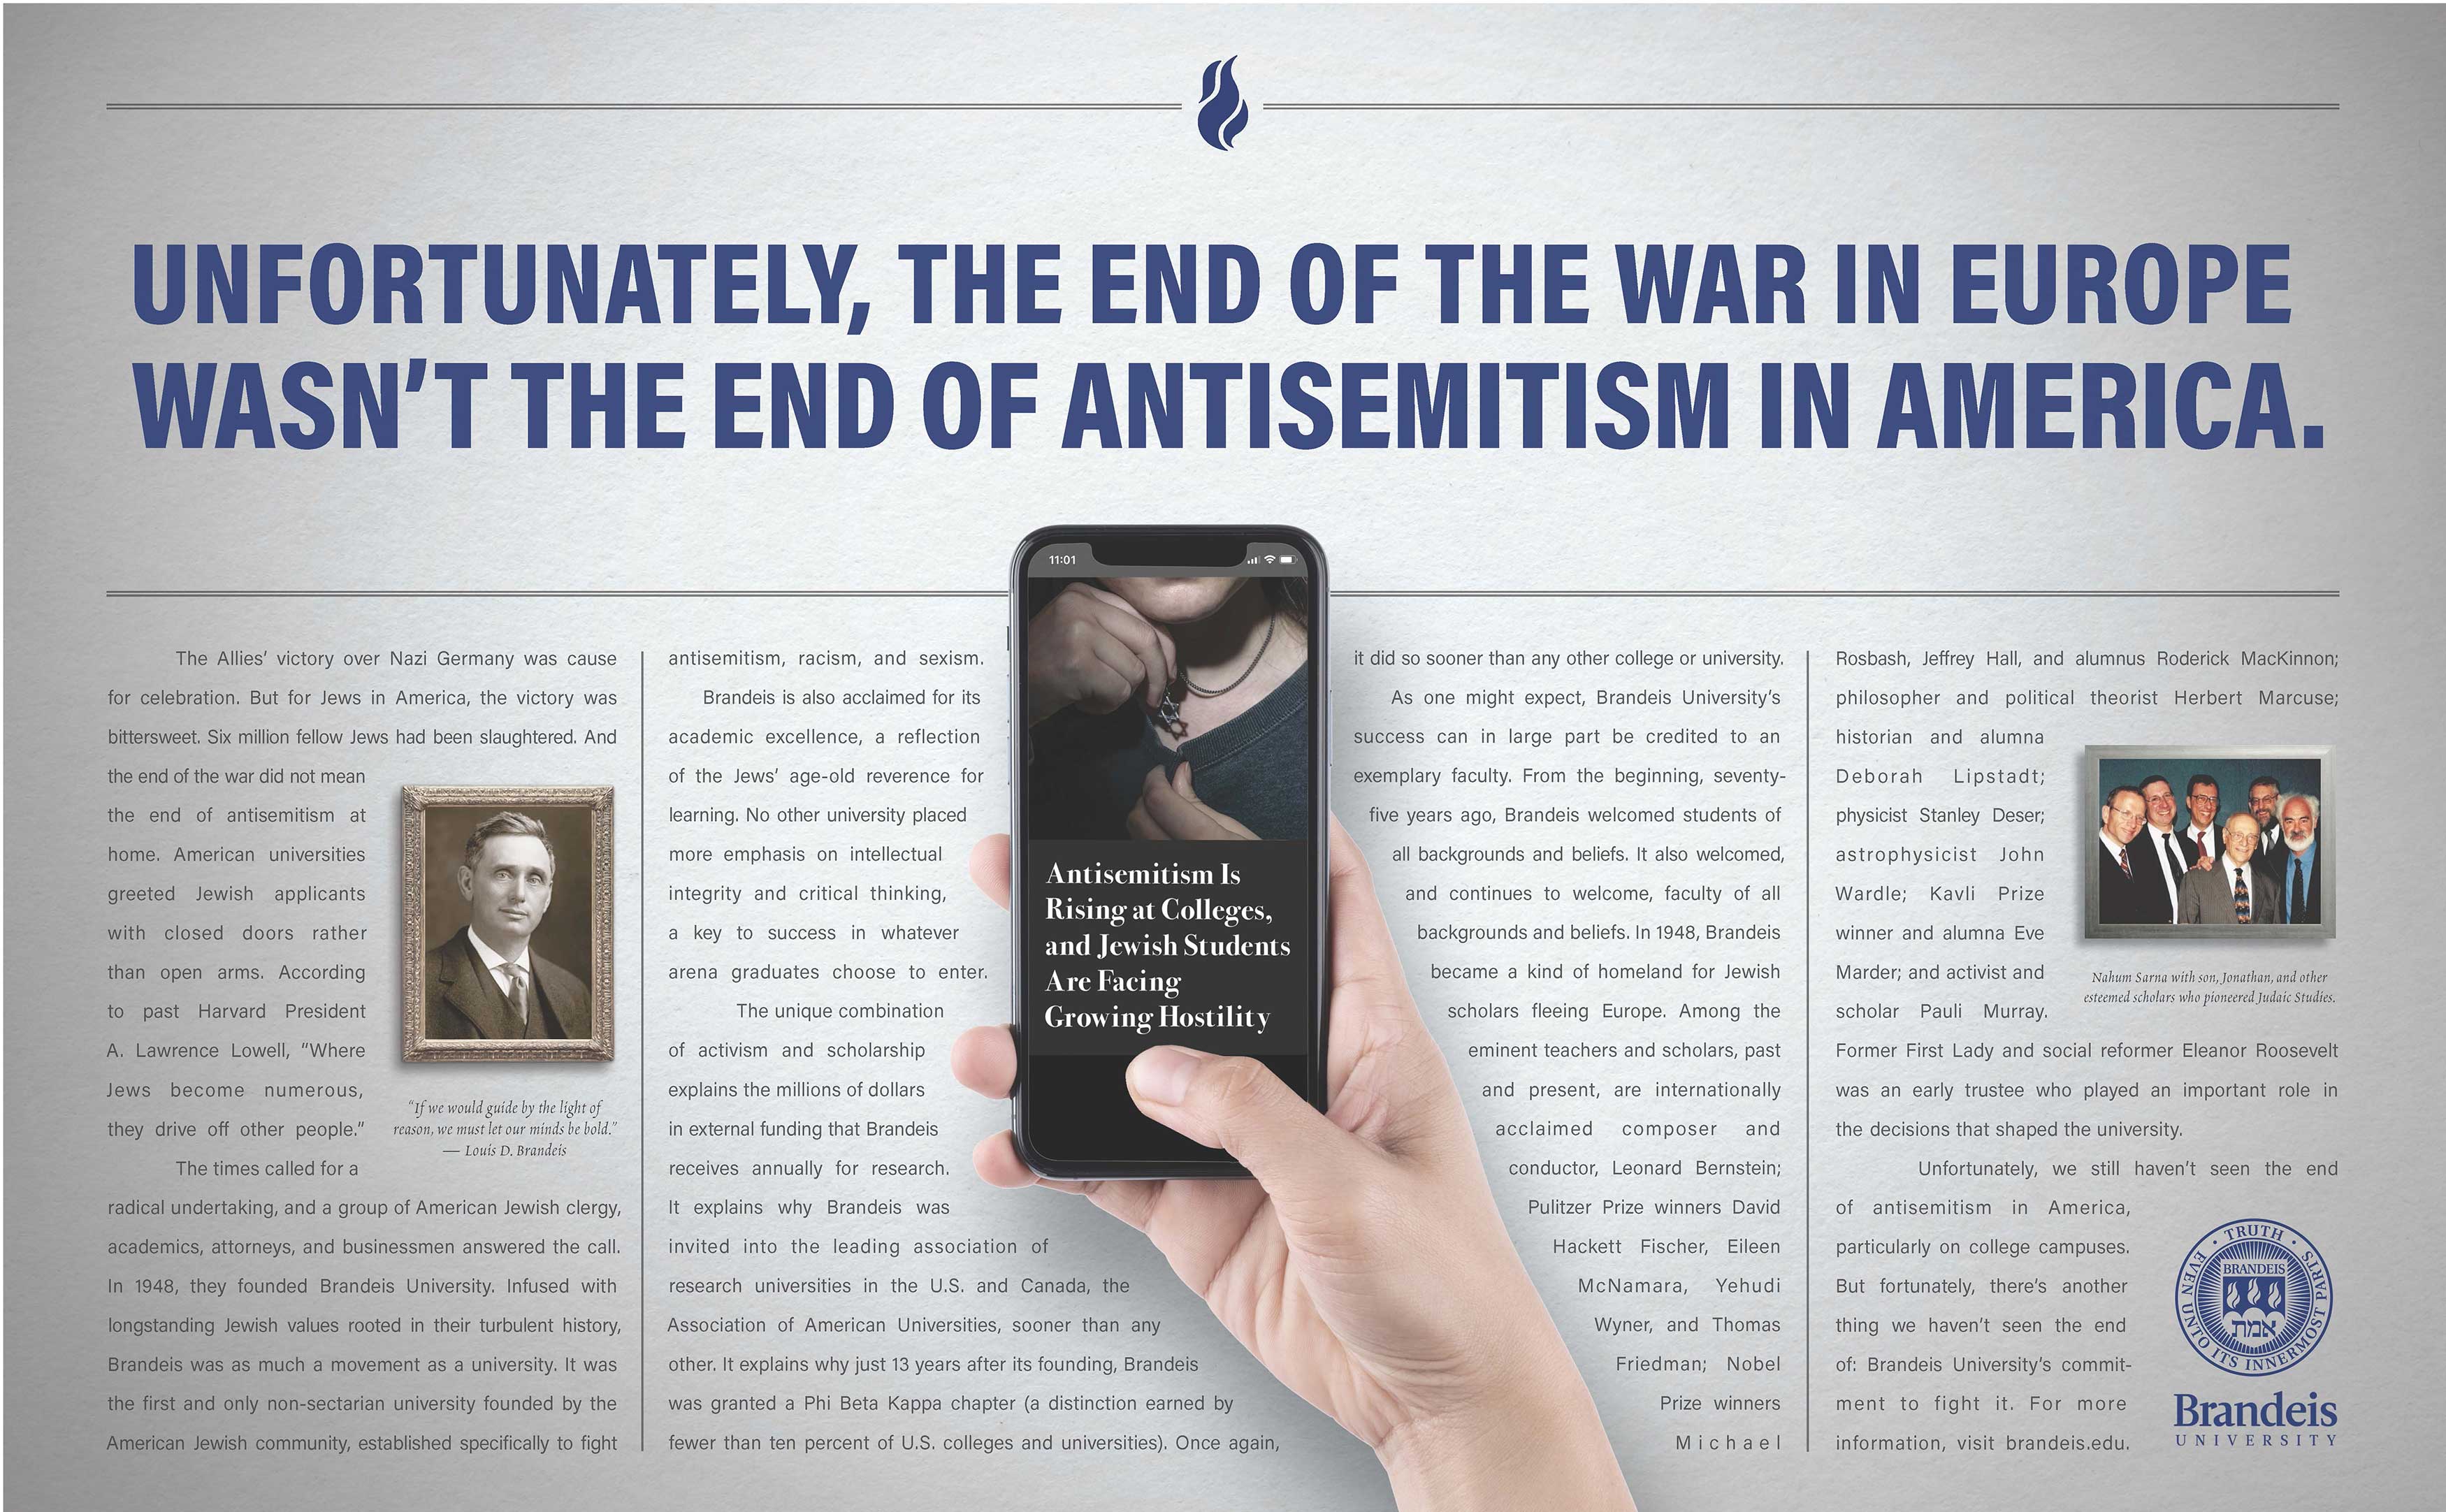 Ad headline: Unfortunately, the end of World War II in Europe wasn't the end of antisemitism in America. Ad text: The Allies’ victory over Nazi Germany was cause for celebration. But for Jews in America, the victory was bittersweet. Six million fellow Jews had been slaughtered. And the end of the war did not mean the end of antisemitism at home. American universities greeted Jewish applicants with closed doors rather than open arms. According to past Harvard President A. Lawrence Lowell, “Where Jews become numerous, they drive off other people.” (Inline image: portrait of Louis D. Brandeis with the quote, “If we would guide by the light of reason, we must let our minds be bold.” — Louis D. Brandeis) The times called for a radical undertaking, and a group of American Jewish clergy, academics, attorneys, and businessmen answered the call. In 1948, they founded Brandeis University. Infused with longstanding Jewish values rooted in their turbulent history, Brandeis was as much a movement as a university. It was the first and only non-sectarian university founded by the American Jewish community, established specifically to fight antisemitism, racism, and sexism. (Inline image of a hand holding a cell phone that reads "Antisemitism Is Rising at Colleges, and Jewish Students Are Facing Growing Hostility") Brandeis is also acclaimed for its academic excellence, a reflection of the Jews’ age-old reverence for learning. No other university placed more emphasis on intellectual integrity and critical thinking, a key to success in whatever arena graduates choose to enter. The unique combination  of activism and scholarship  explains the millions of dollars in external funding that Brandeis receives annually for research. It explains why Brandeis was invited into the leading association of research universities in the U.S. and Canada, the Association of American Universities, sooner than any other. It explains why just 13 years after its founding, Brandeis was granted a Phi Beta Kappa chapter (a distinction earned by fewer than ten percent of U.S. colleges and universities). Once again, it did so sooner than any other college or university. As one might expect, Brandeis University’s success can in large part be credited to an exemplary faculty. From the beginning, seventy-five years ago, Brandeis welcomed students of all backgrounds and beliefs. It also welcomed, and continues to welcome, faculty of all backgrounds and beliefs. In 1948, Brandeis became a kind of homeland for Jewish scholars fleeing Europe. Among the eminent teachers and scholars, past and present, are internationally acclaimed composer and conductor, Leonard Bernstein; Pulitzer Prize winners David Hackett Fischer, Eileen McNamara, Yehudi Wyner, and Thomas Friedman; Nobel Prize winners Michael Rosbash, Jeffrey Hall, and alumnus Roderick MacKinnon; philosopher and political theorist Herbert Marcuse; historian and alumna Deborah Lipstadt; physicist Stanley Deser; astrophysicist John  Wardle; Kavli Prize winner and alumna Eve Marder; and activist and scholar Pauli Murray. Former First Lady and social reformer Eleanor Roosevelt was an early trustee who played an important role in the decisions that shaped the university. (Inline image: Nahum Sarna with son, Jonathan, and other esteemed scholars who pioneered Judaic Studies.) Unfortunately, we still haven’t seen the end of antisemitism in America, particularly on college campuses. But fortunately, there’s another thing we haven’t seen the end of: Brandeis University’s commitment to fight it. For more information, visit brandeis.edu.